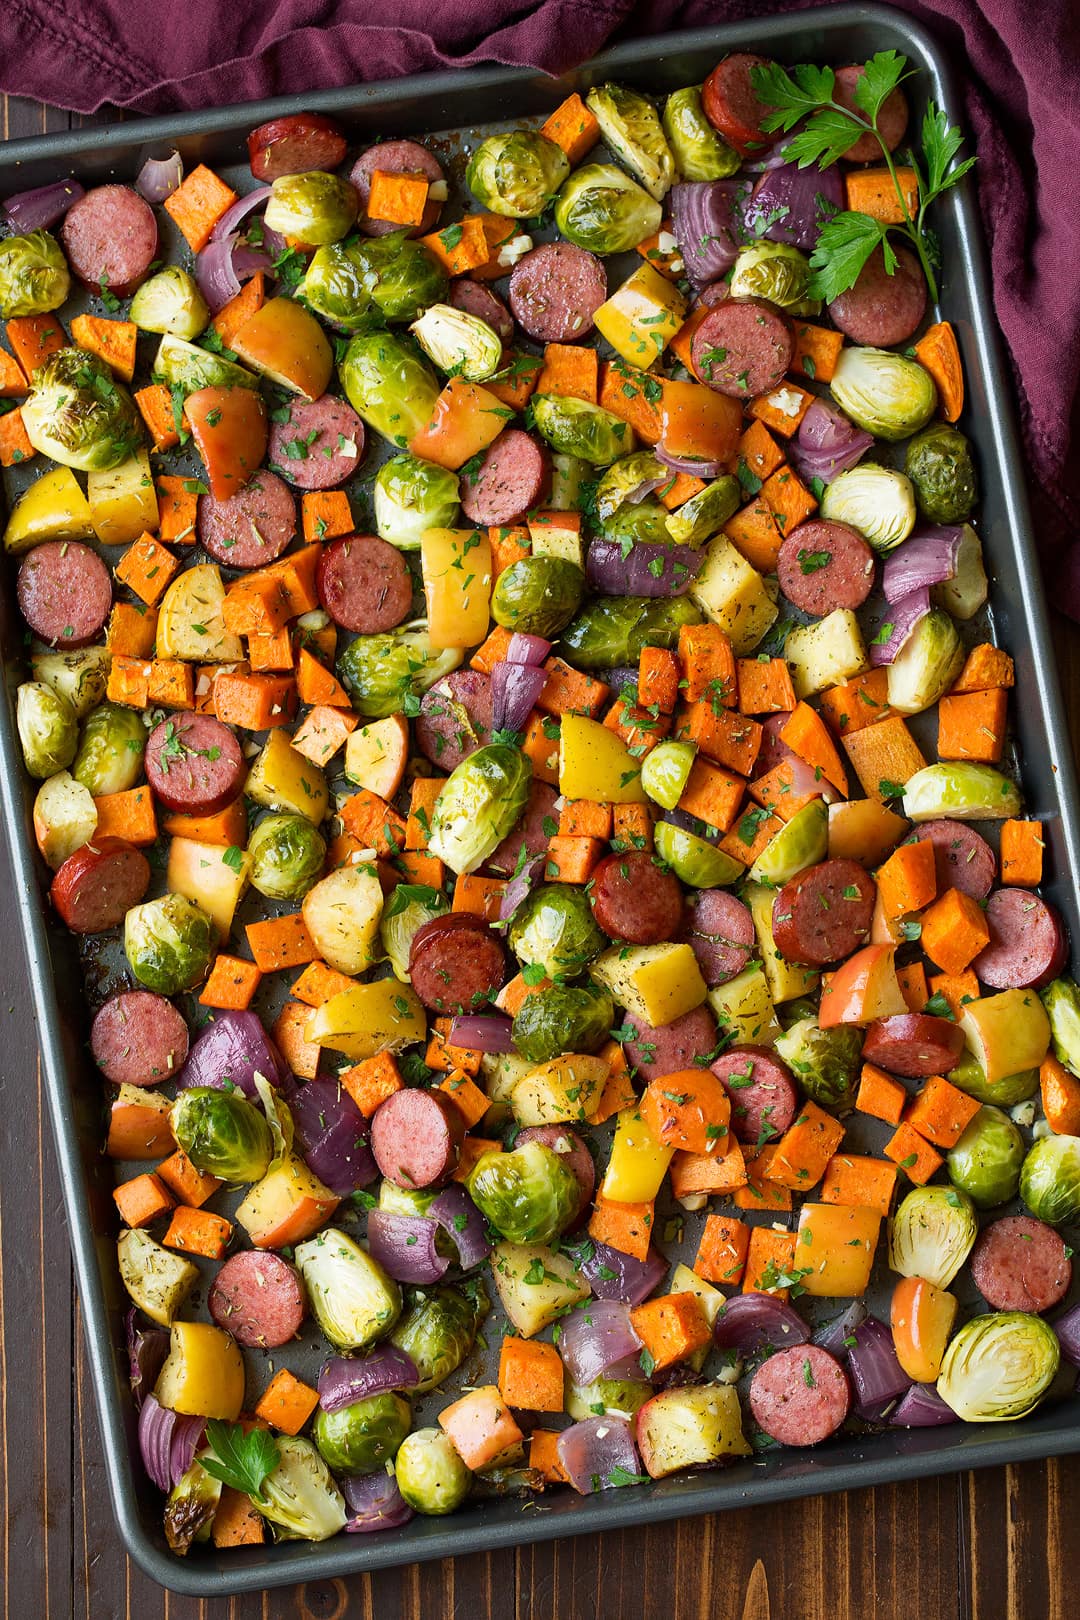 Sheet Pan Dinner with Turkey Sausage Sweet Potatoes Brussels Sprouts Apples and Red Onions